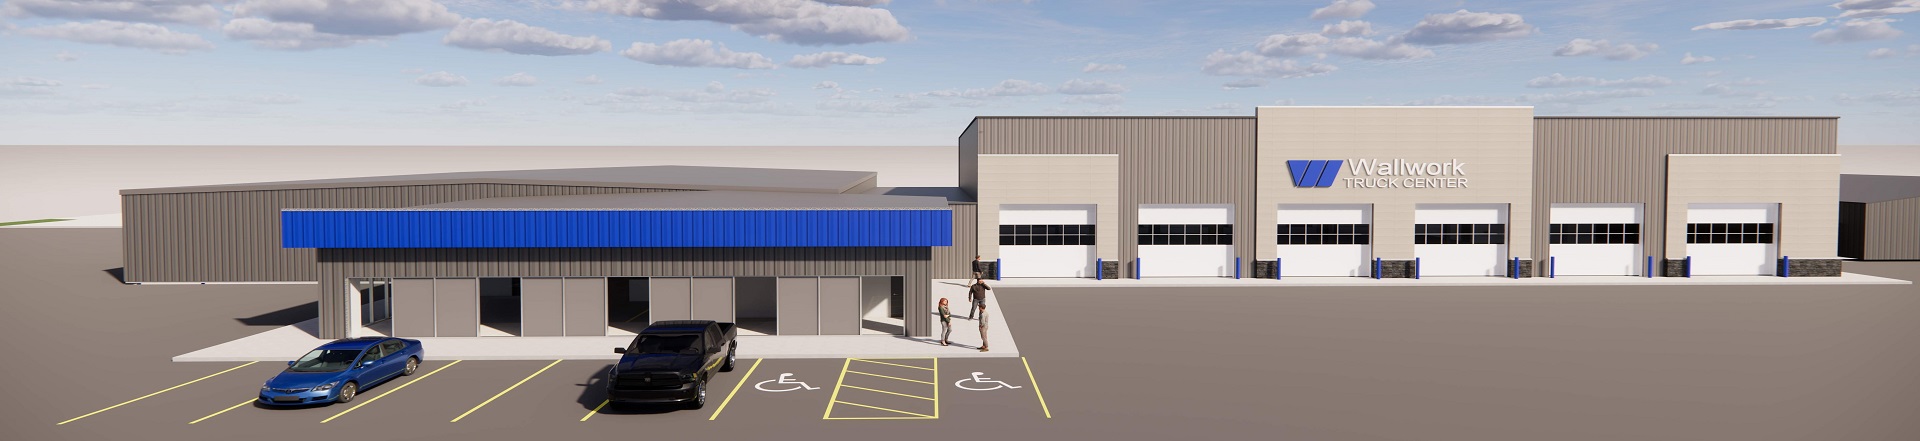 WTC Grand Forks, ND | Wallwork Truck Center